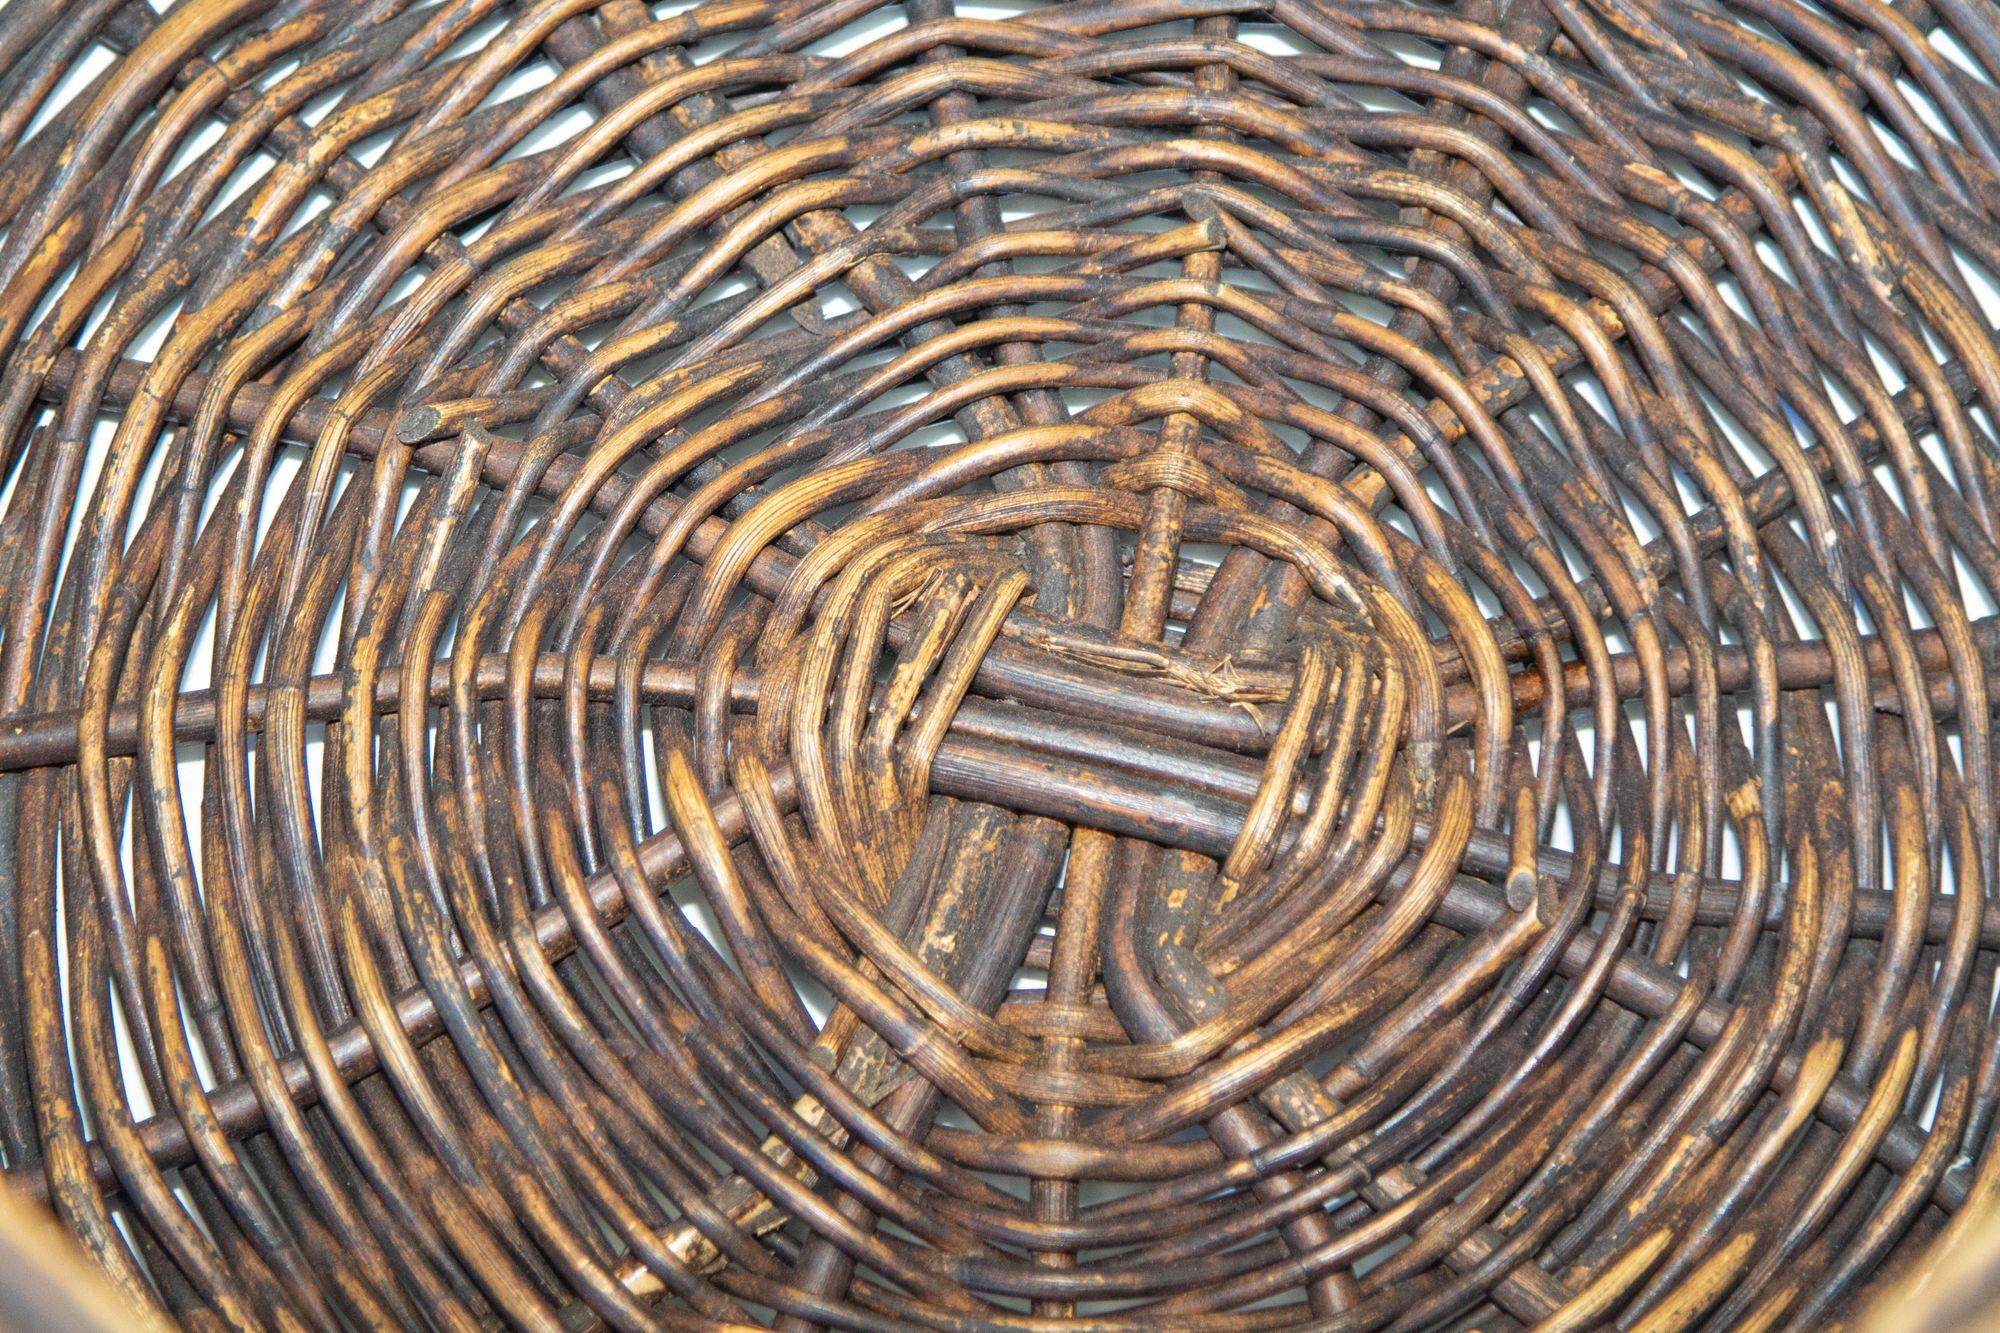 Hand-Crafted Antique French Handwoven Wicker Harvest Basket with Wood Handle